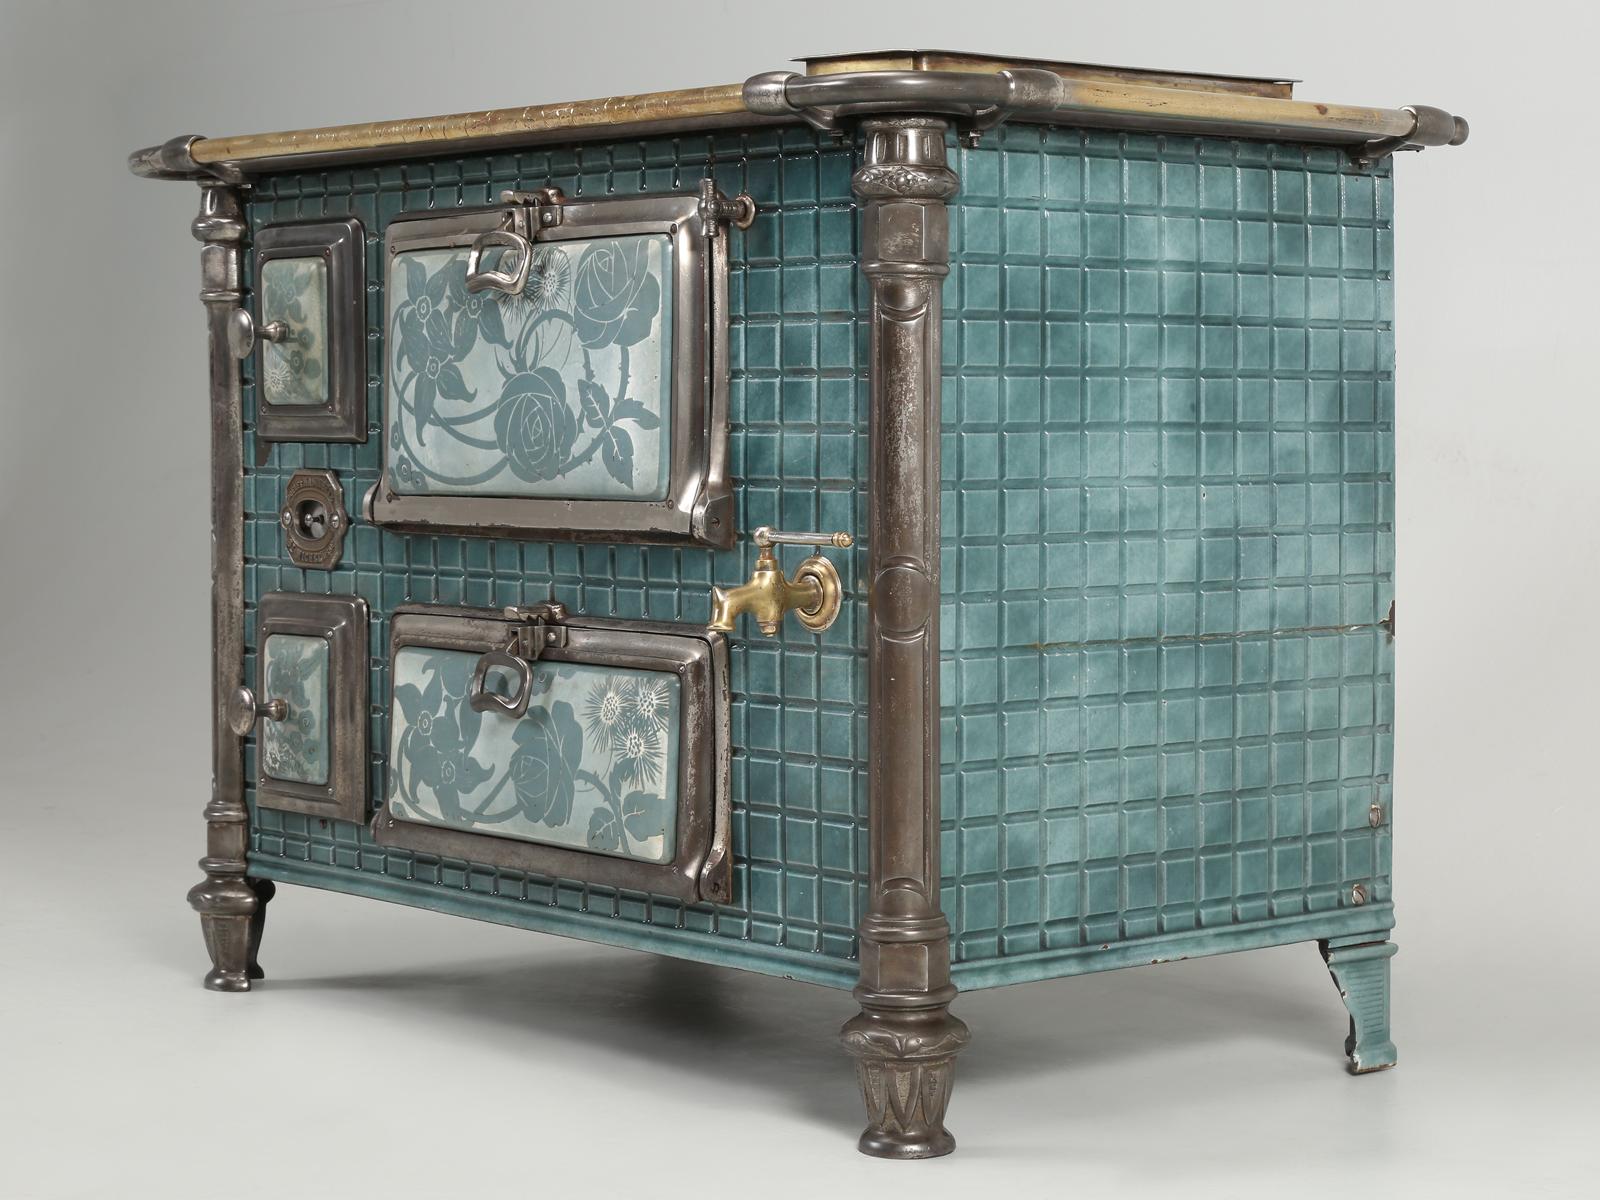 Antique French Stove that we thought would make for a perfect bar. Based on the tile design, we would estimate that it was built around the turn of the century (1888-1910). The hand painted tiles are clearly from the Art Nouveau period and please